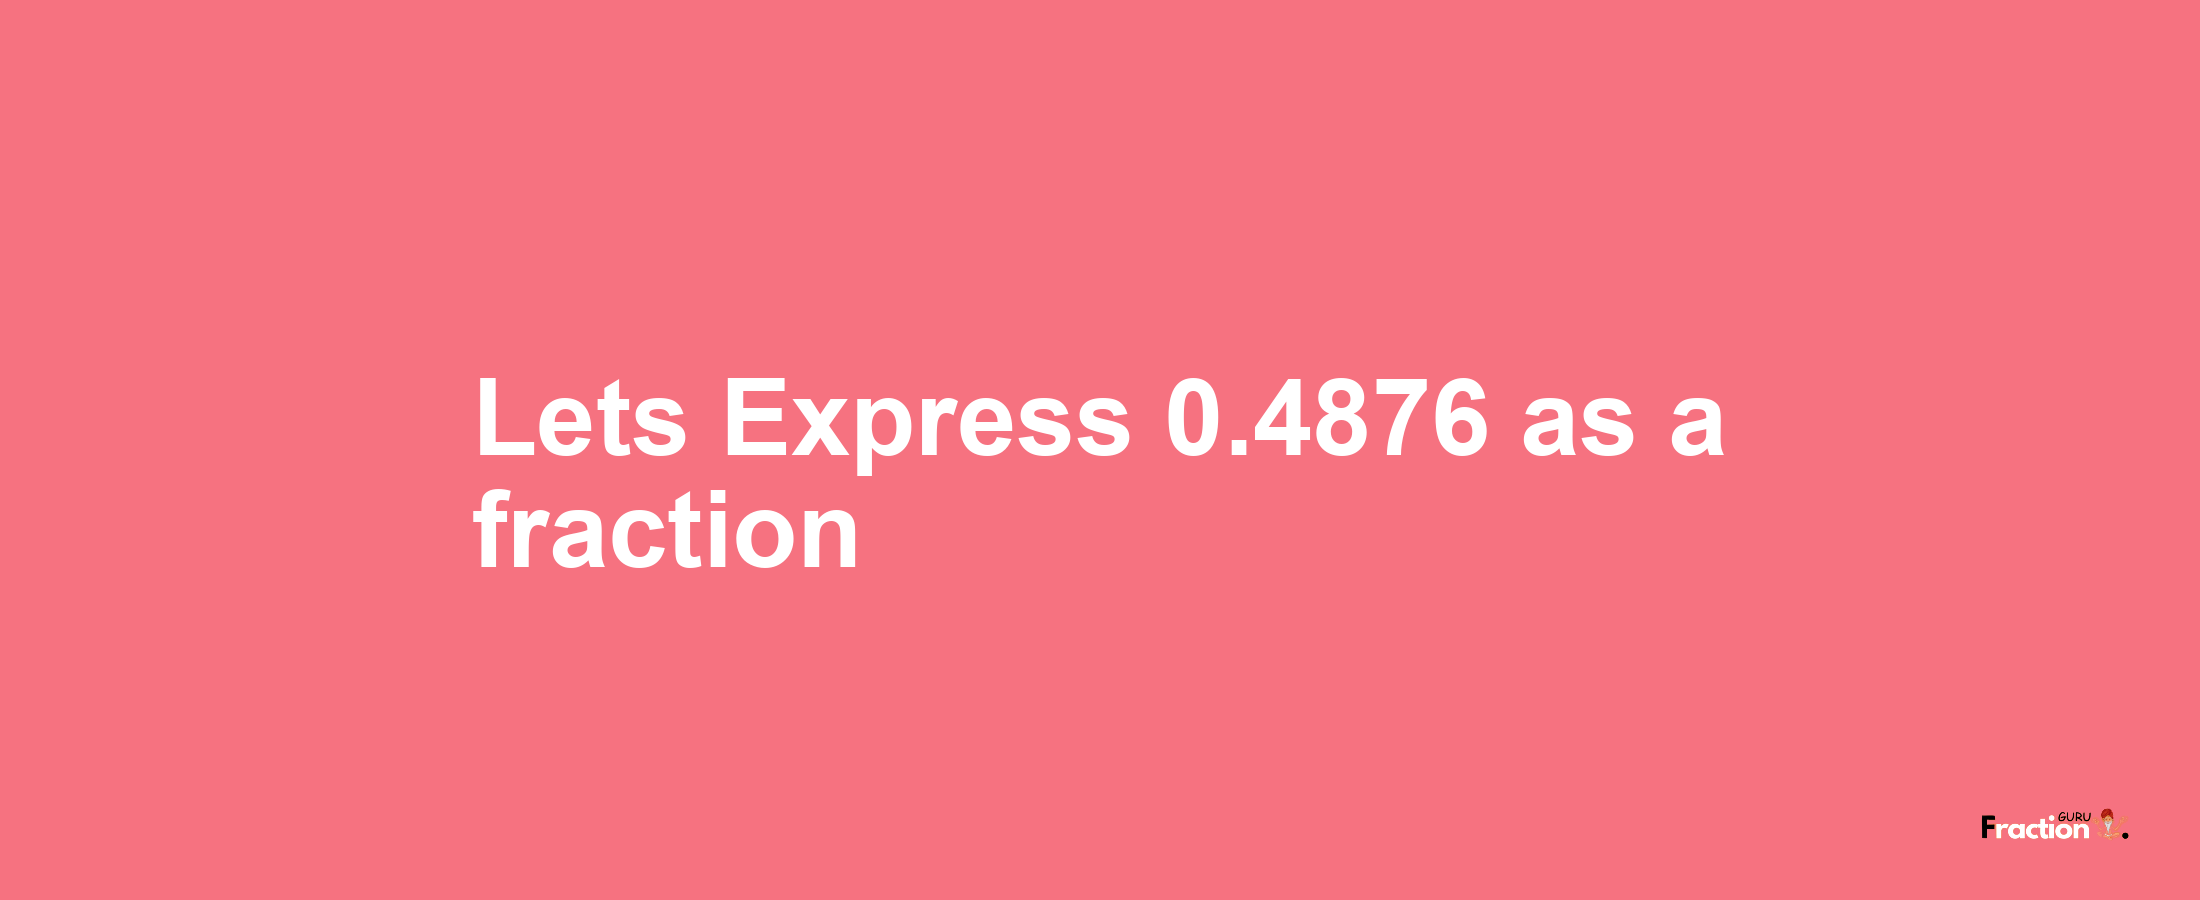 Lets Express 0.4876 as afraction